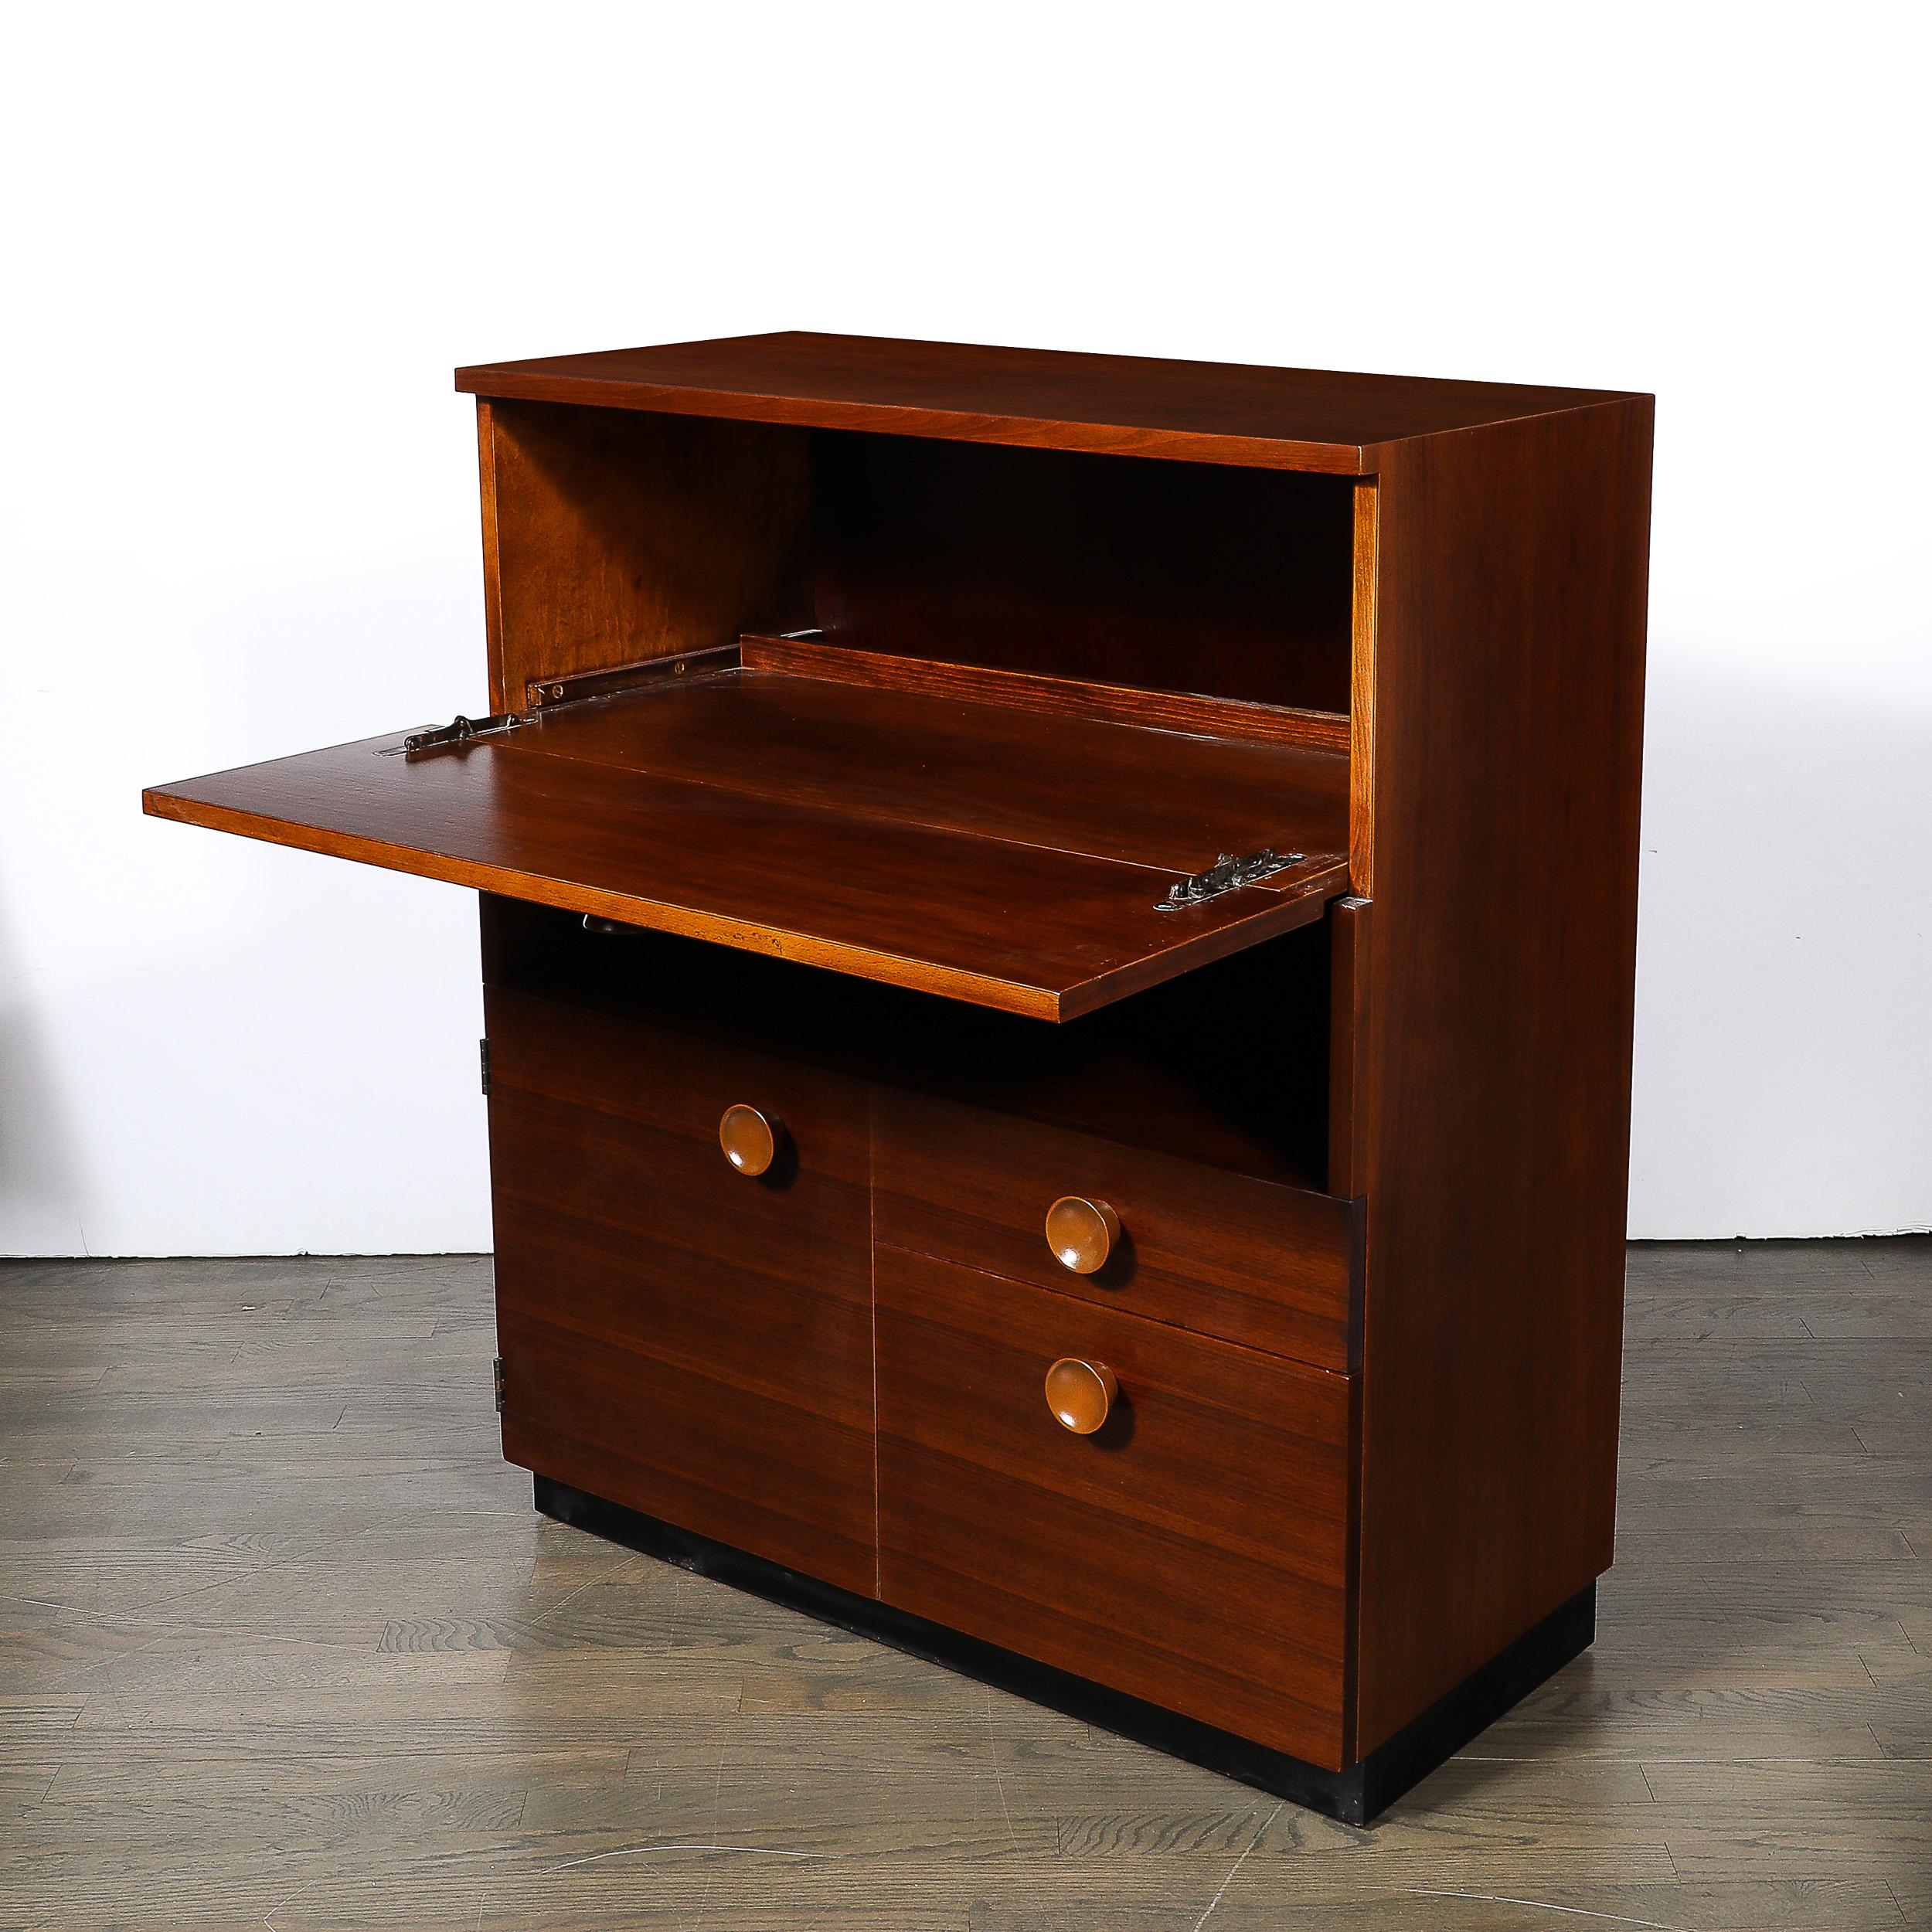 This rare and captivating Art Deco Drop Front Secreter Desk in Book-matched Hand-Rubbed Walnut is by the esteemed furniture designer Gilbert Rohde and originates from the United States, Circa 1942. Features a geometric construction in book-matched